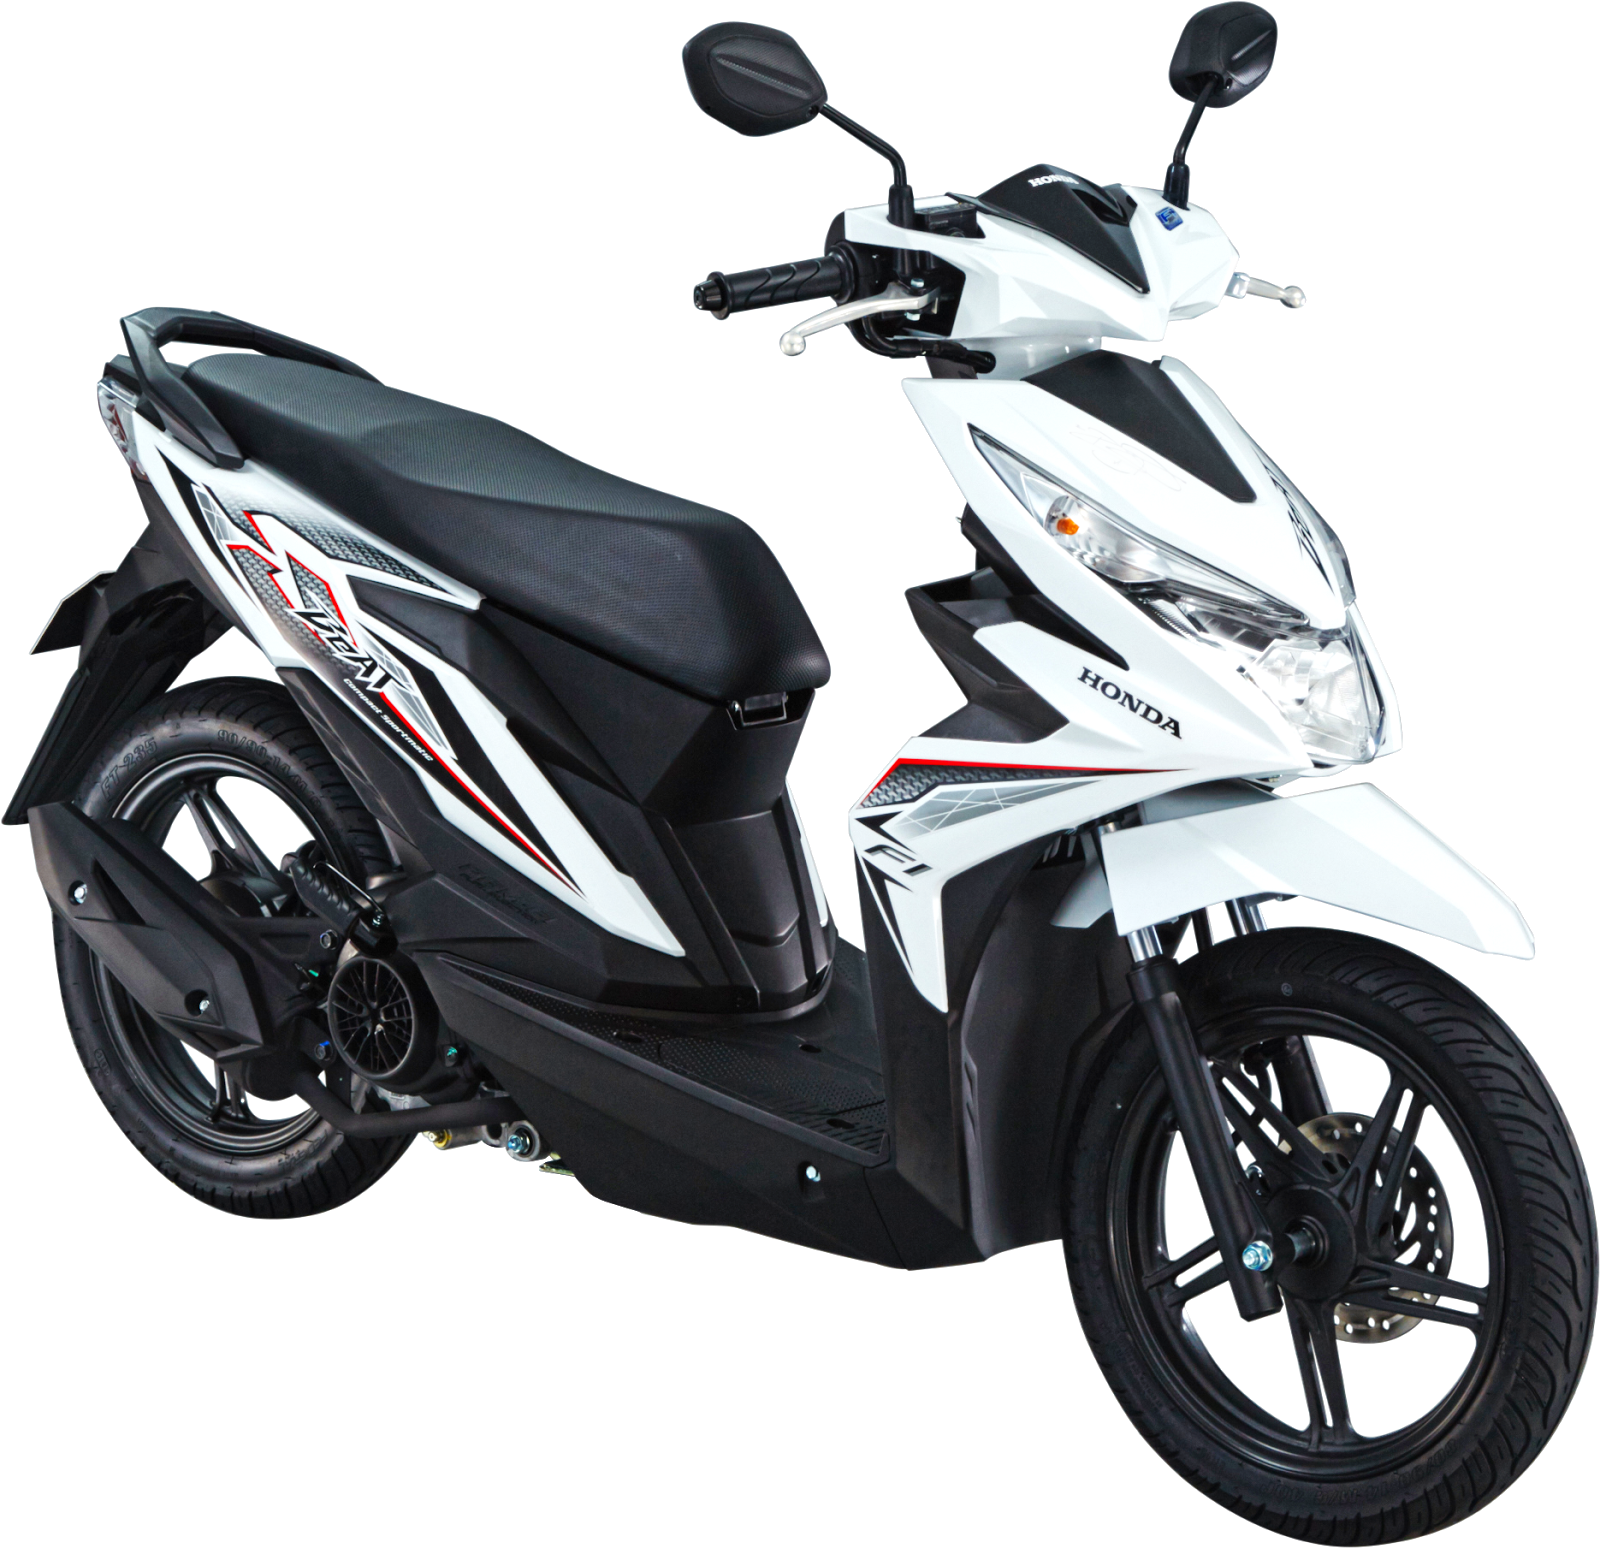 Honda Philippines, Inc. Launches the All-New BeAT - Motoph - motoph.com